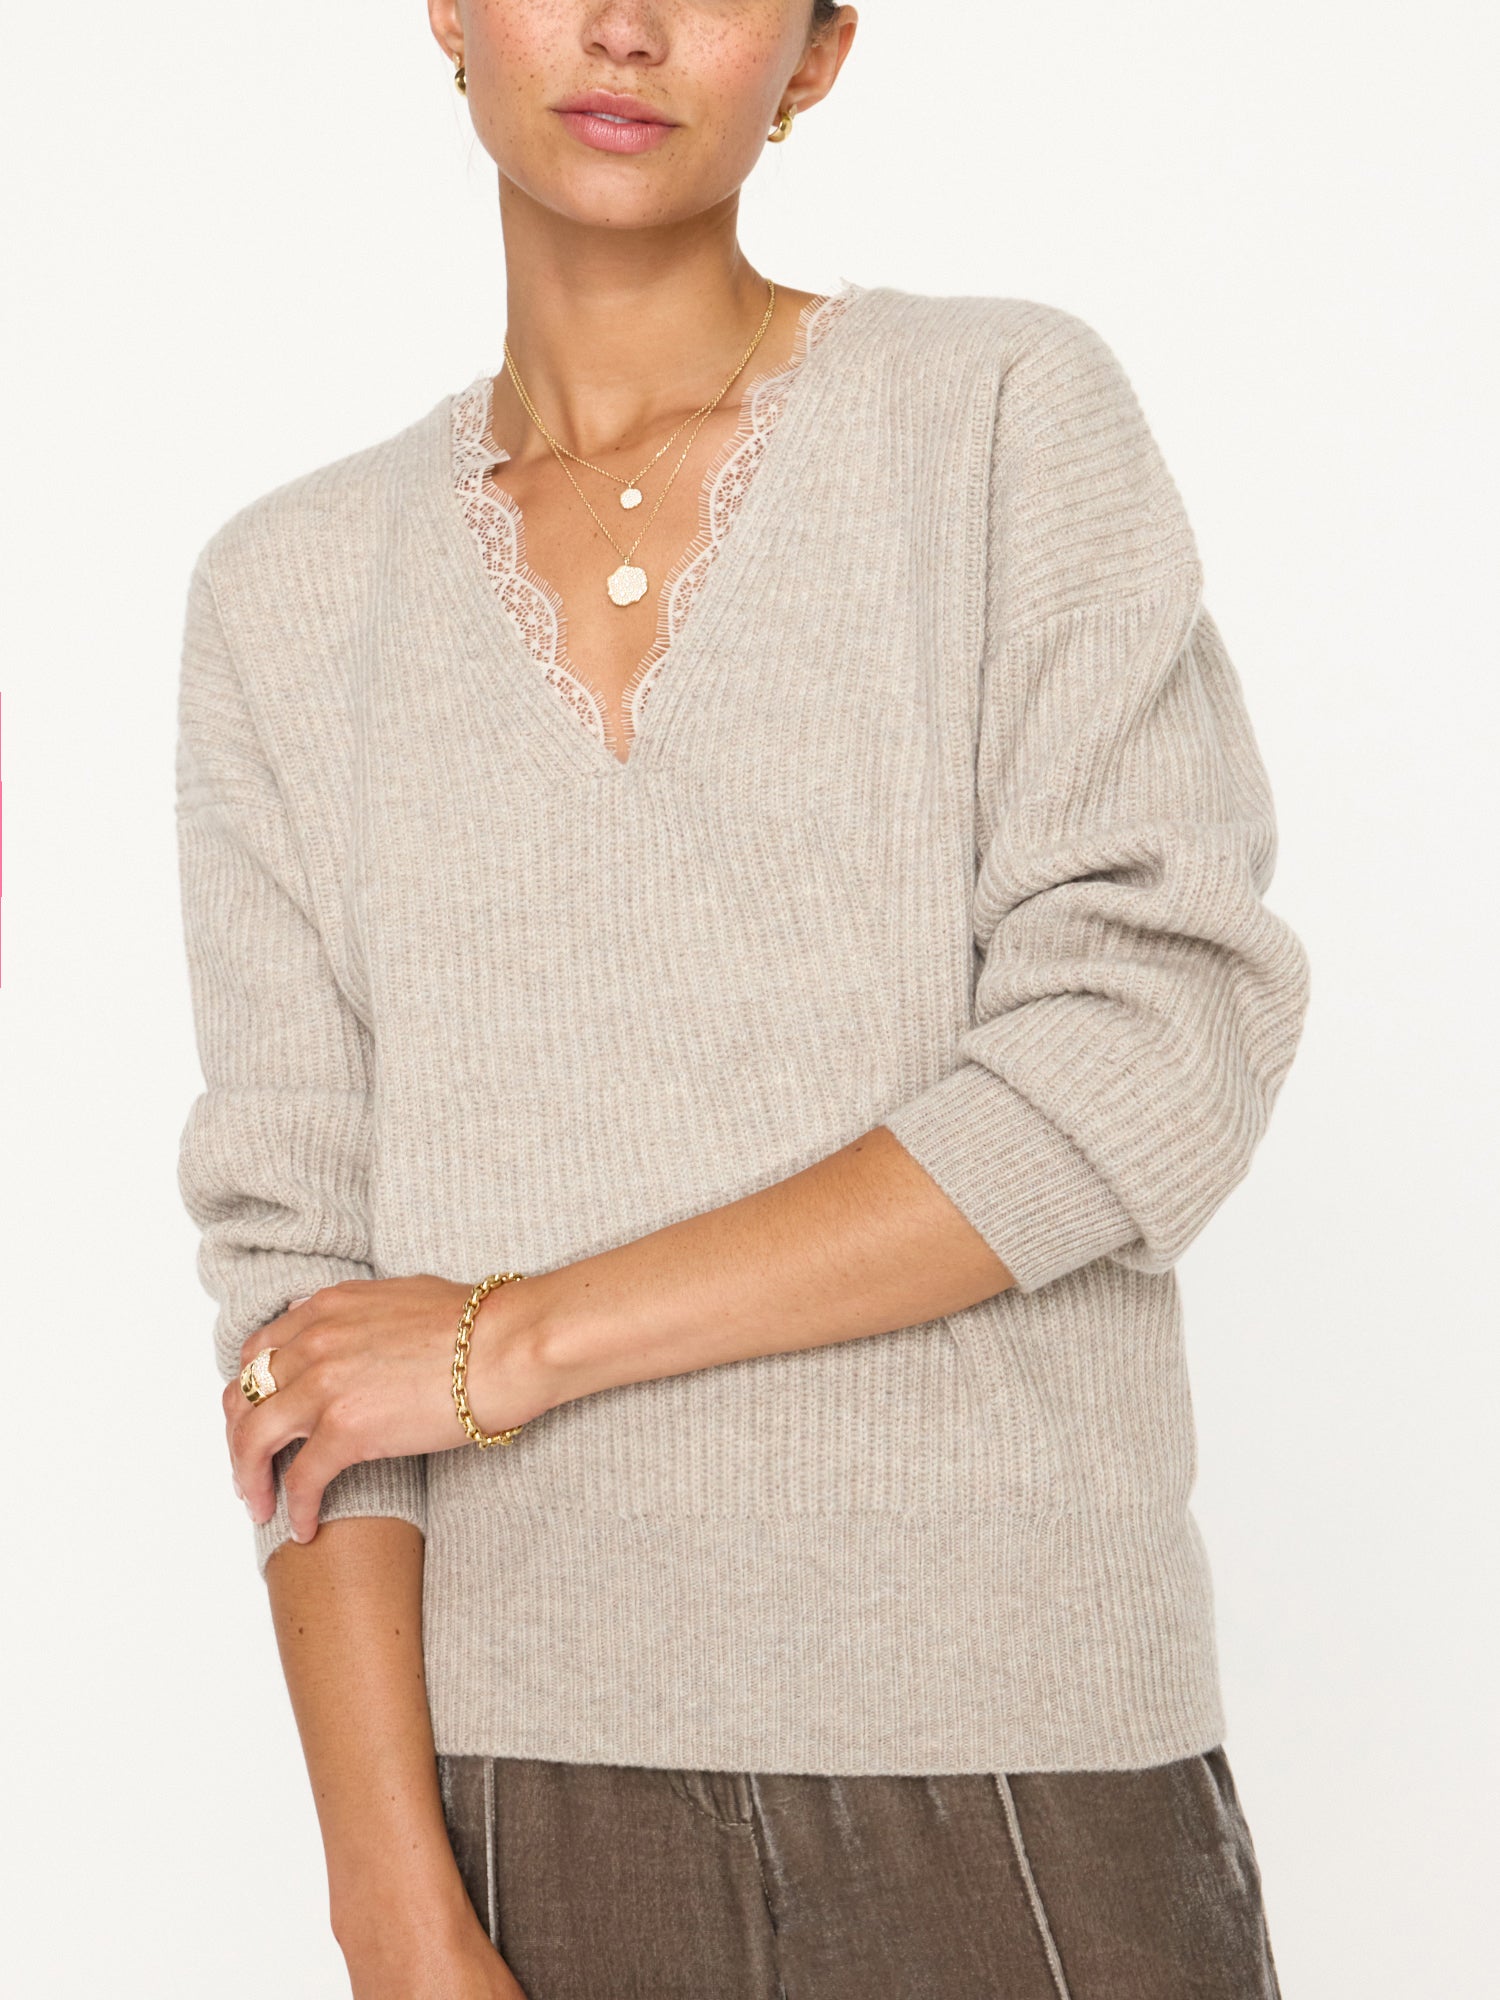 Ava v neck light grey sweater front view